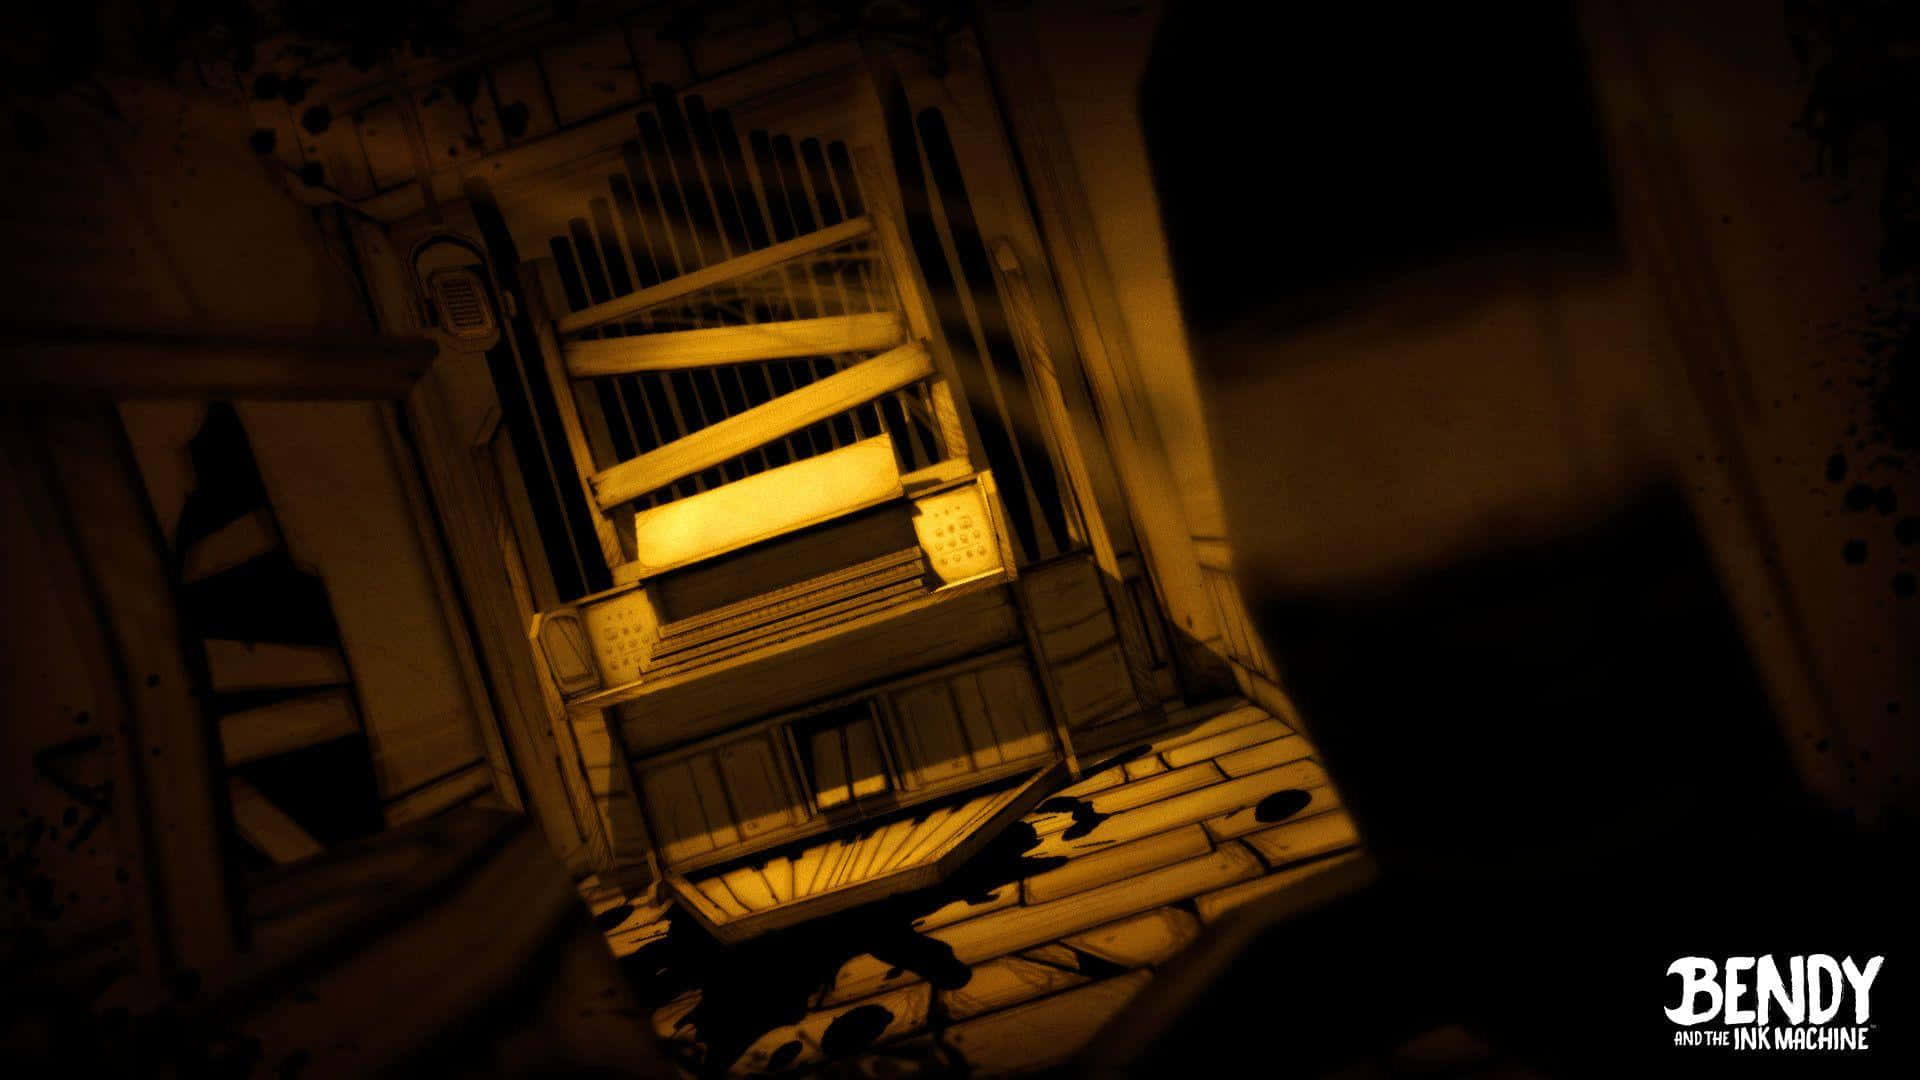 Shabby Dark Room From Bendy And The Ink Machine Wallpaper